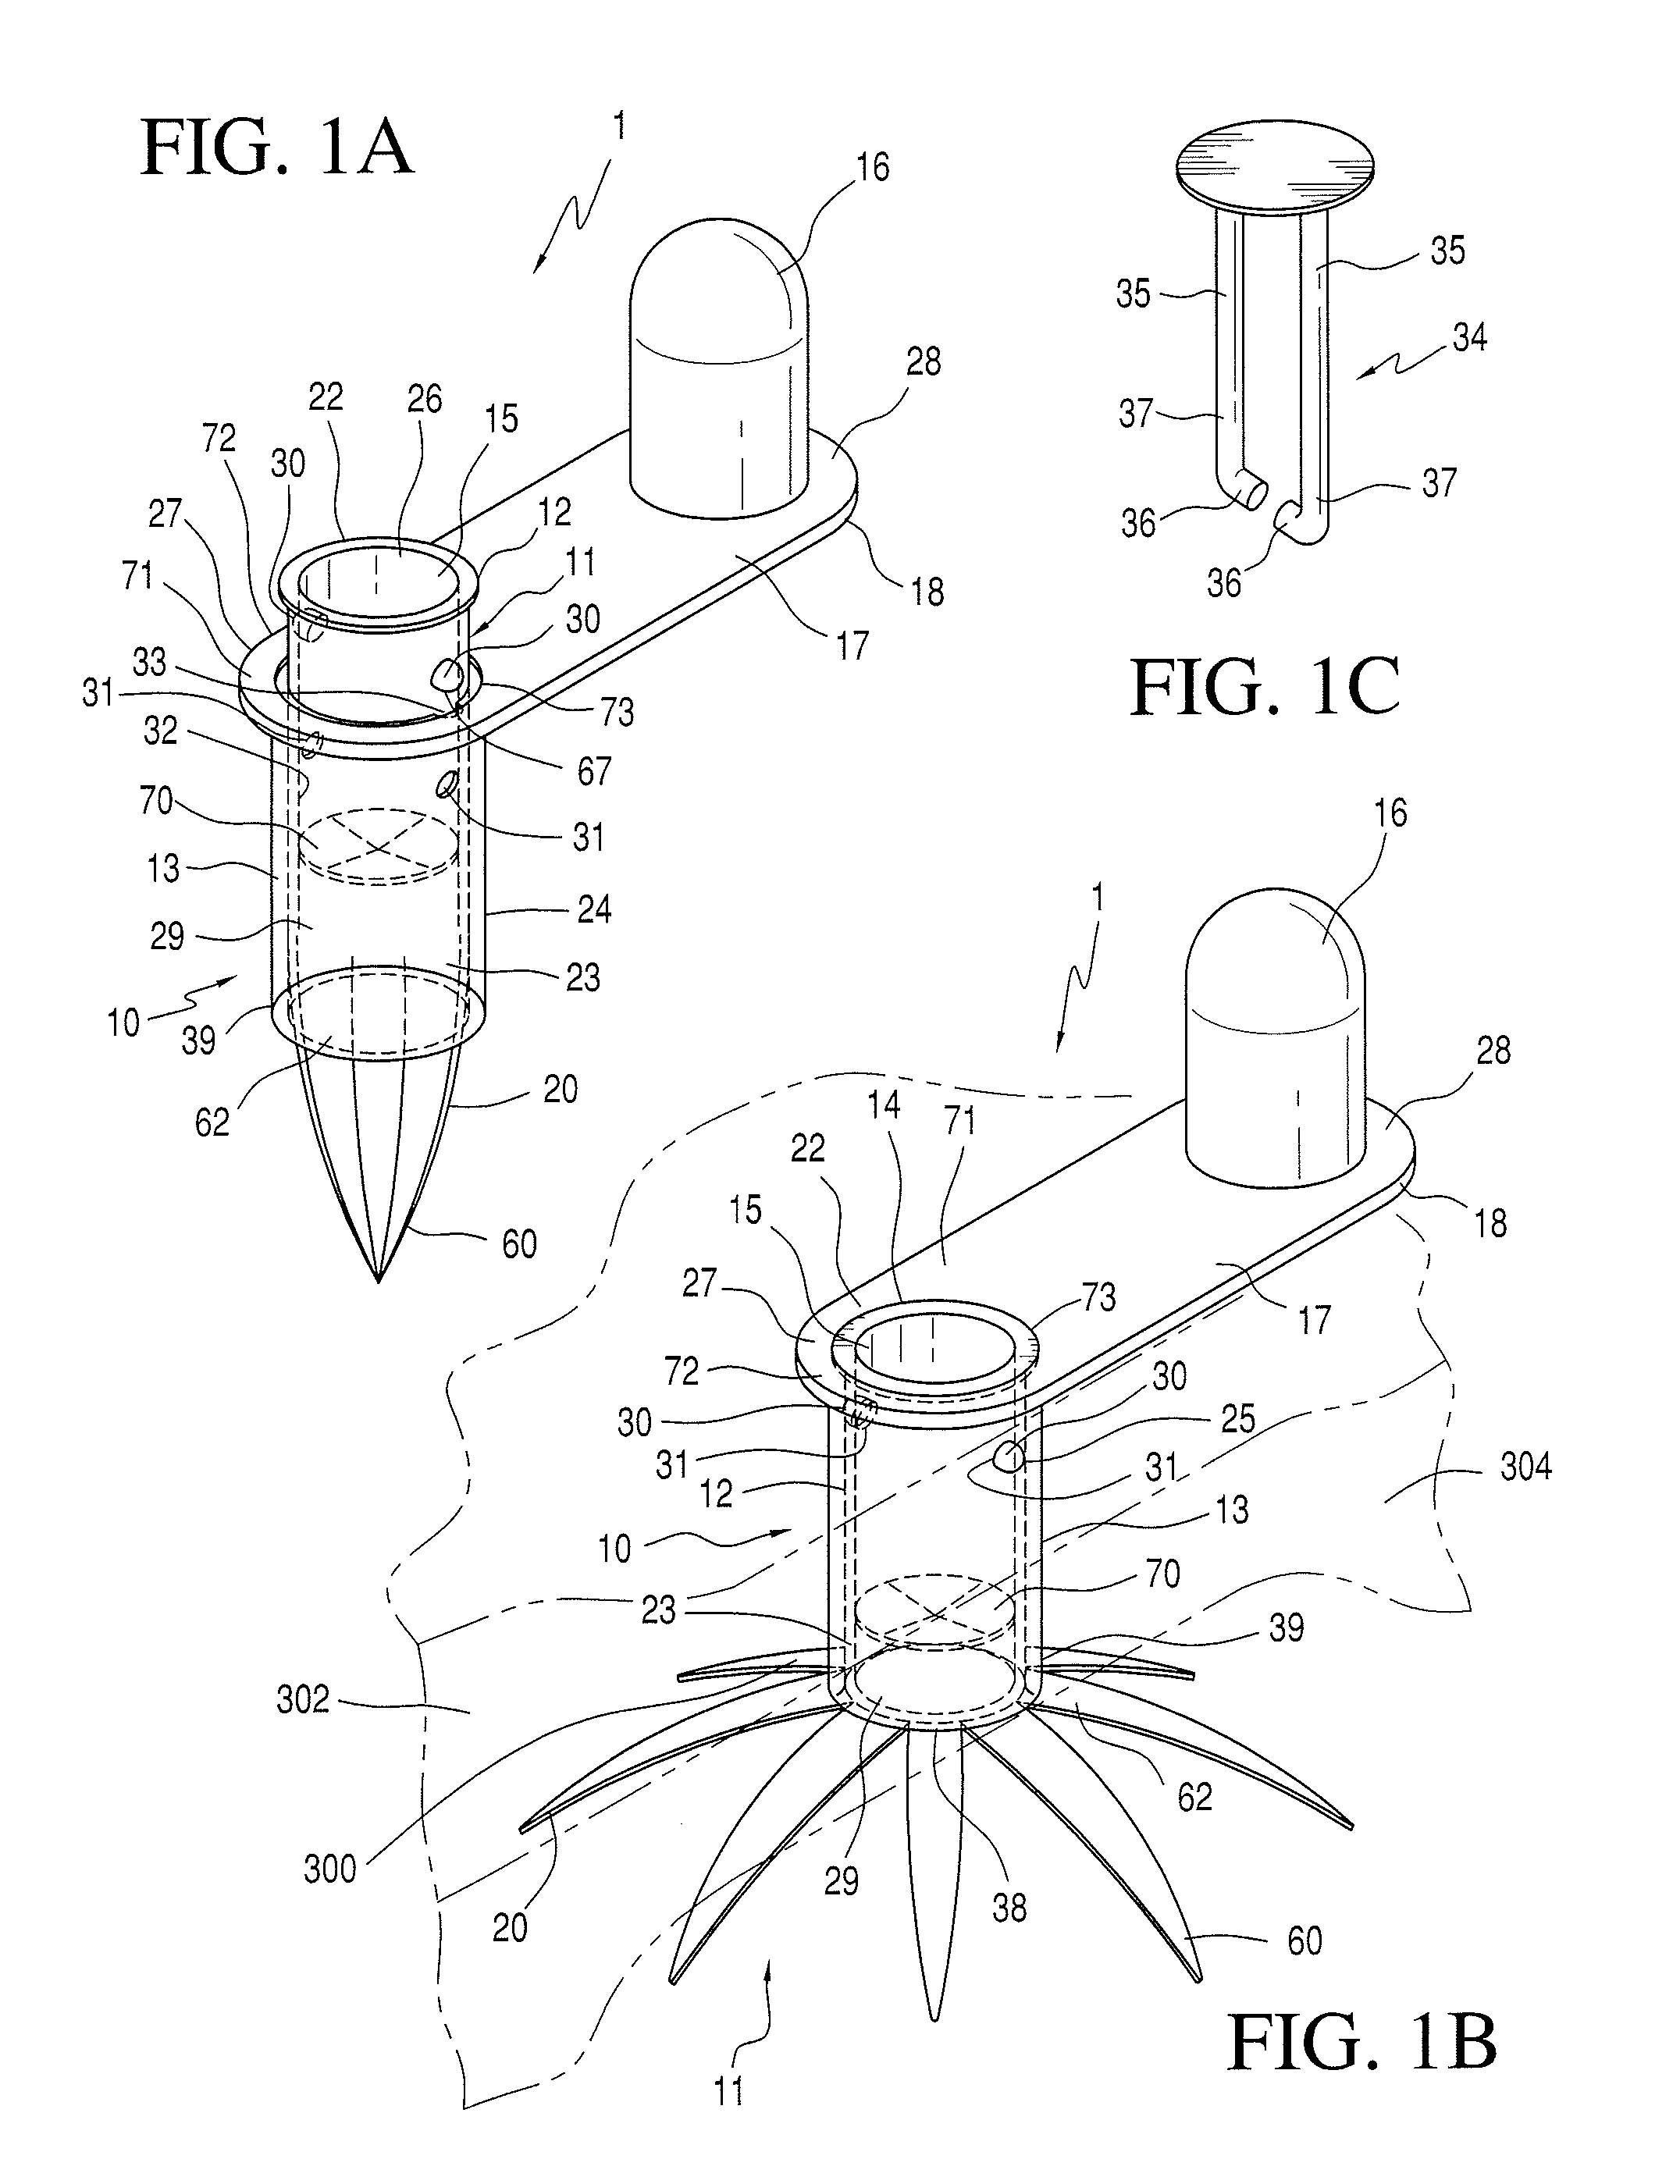 Retention device for gastrostomy tube and low profile gastrostomy device